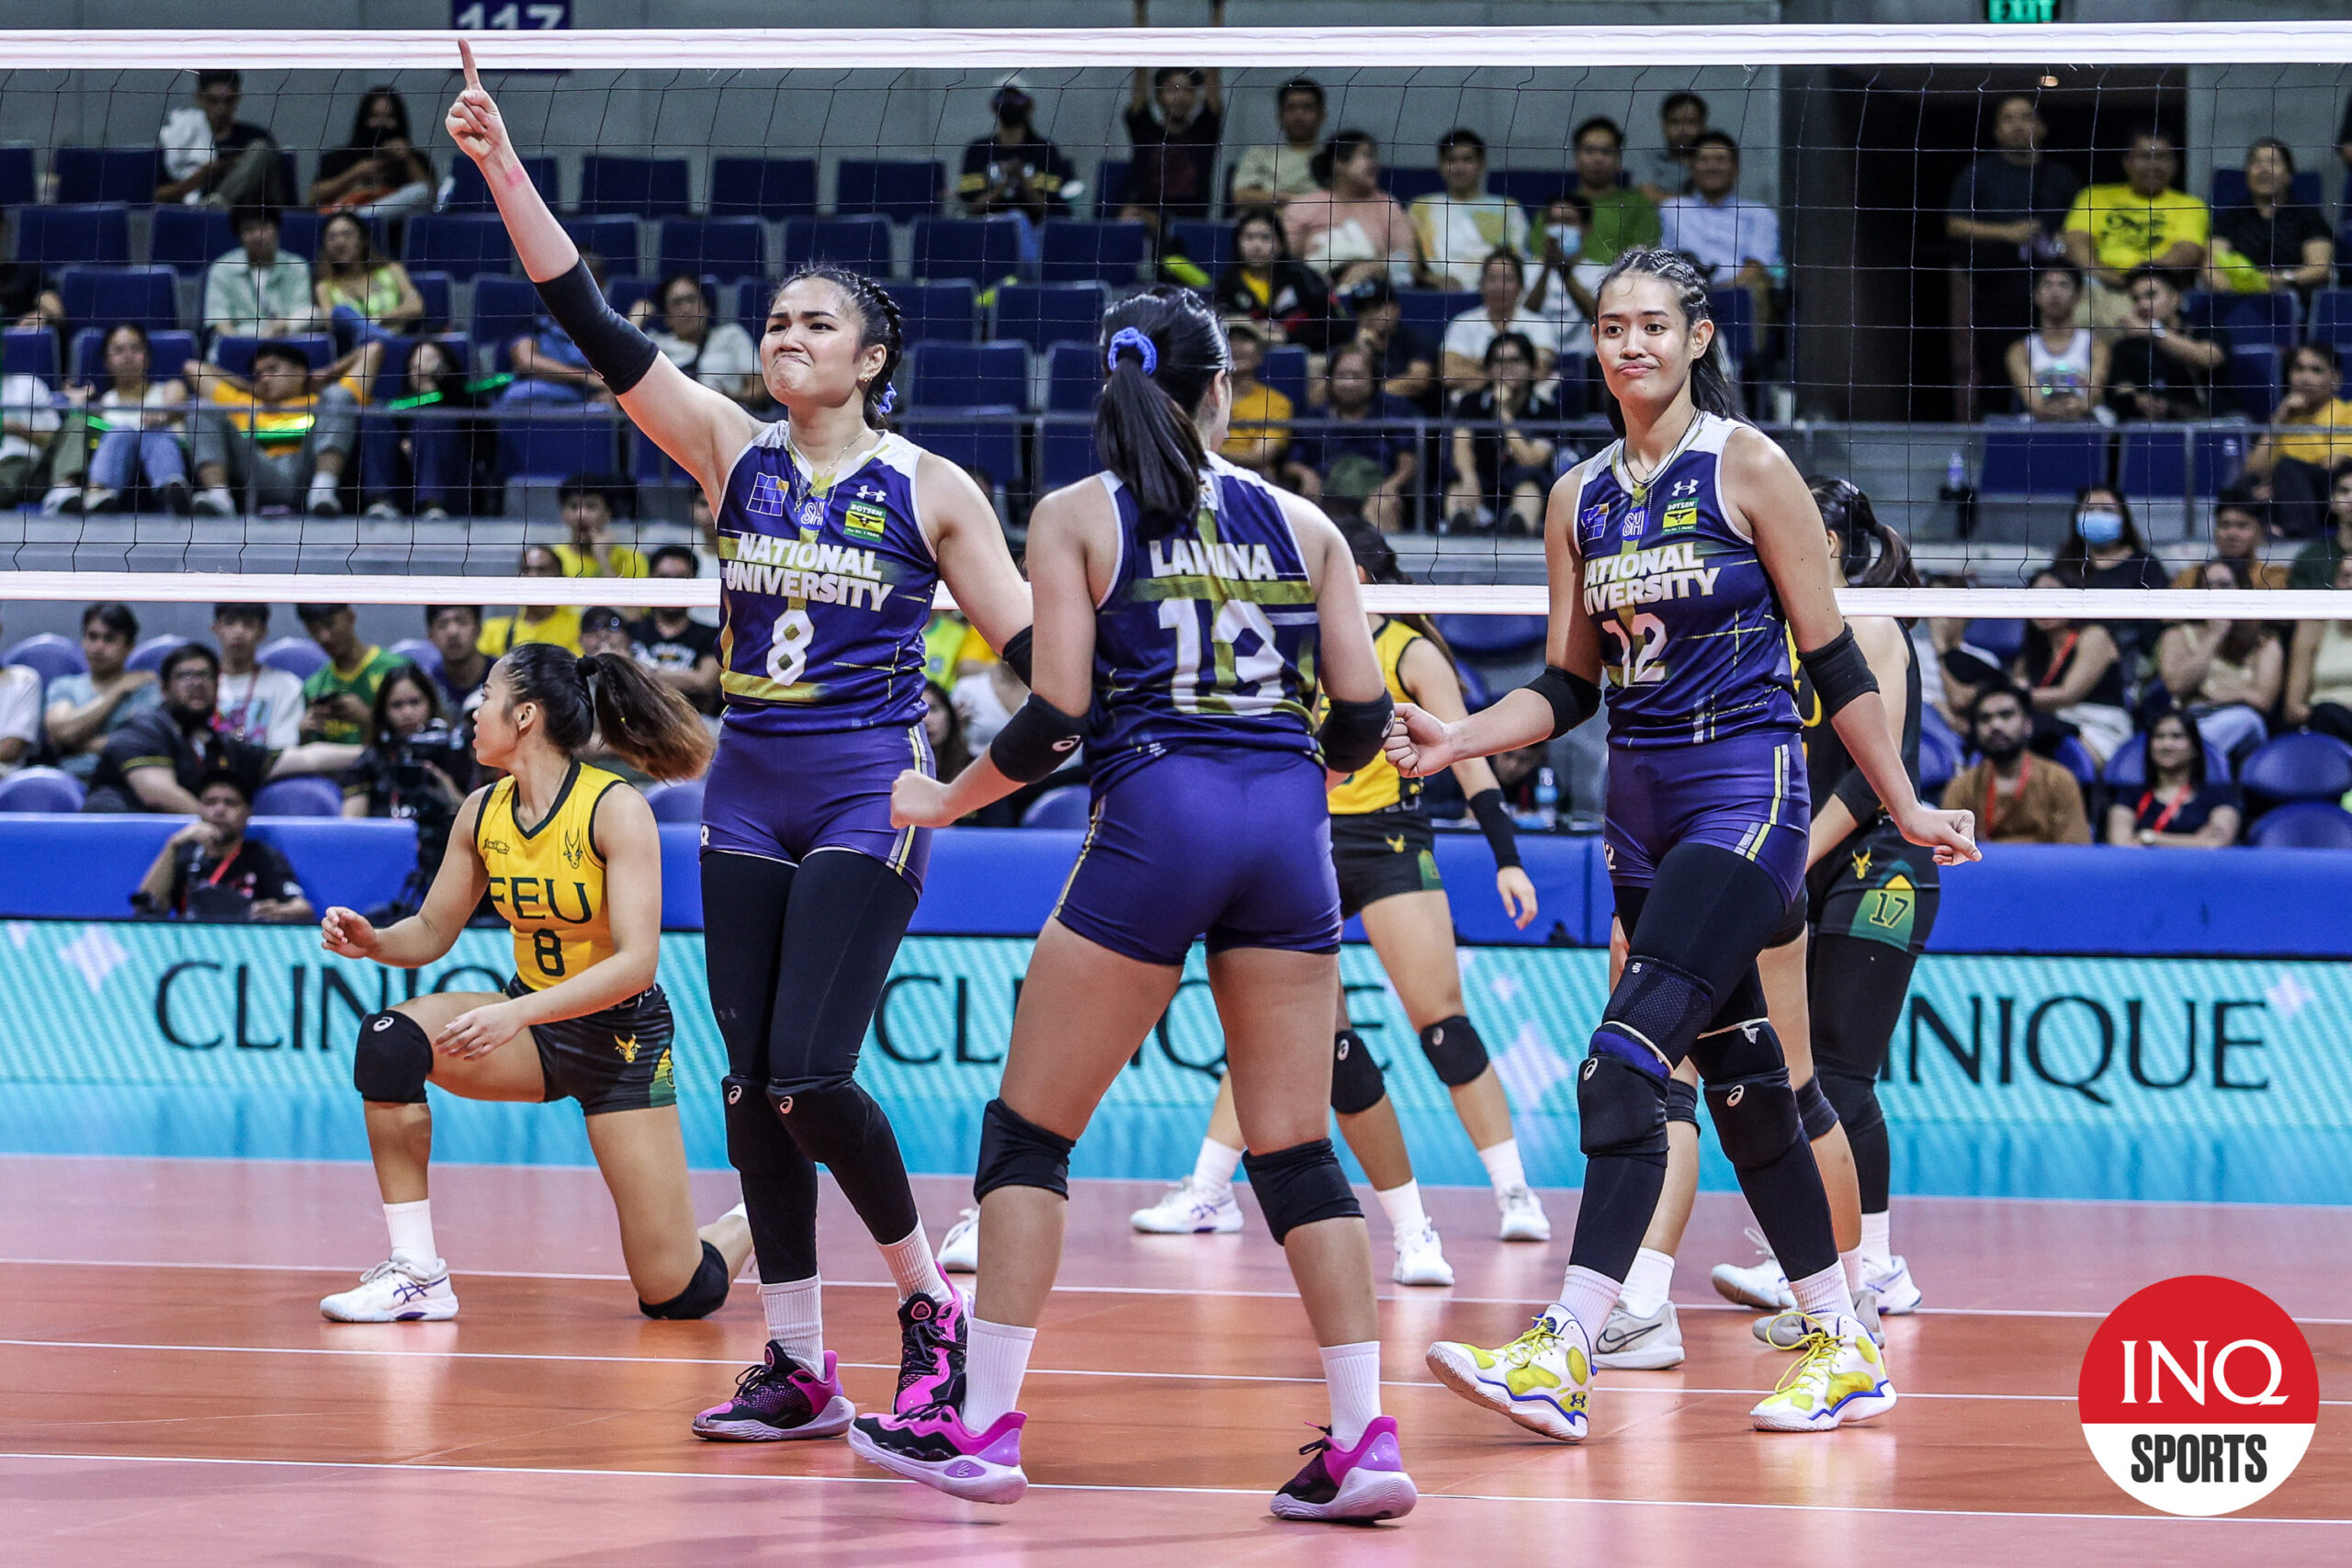 nu lady bulldogs oust feu, face ust in uaap volleyball finals